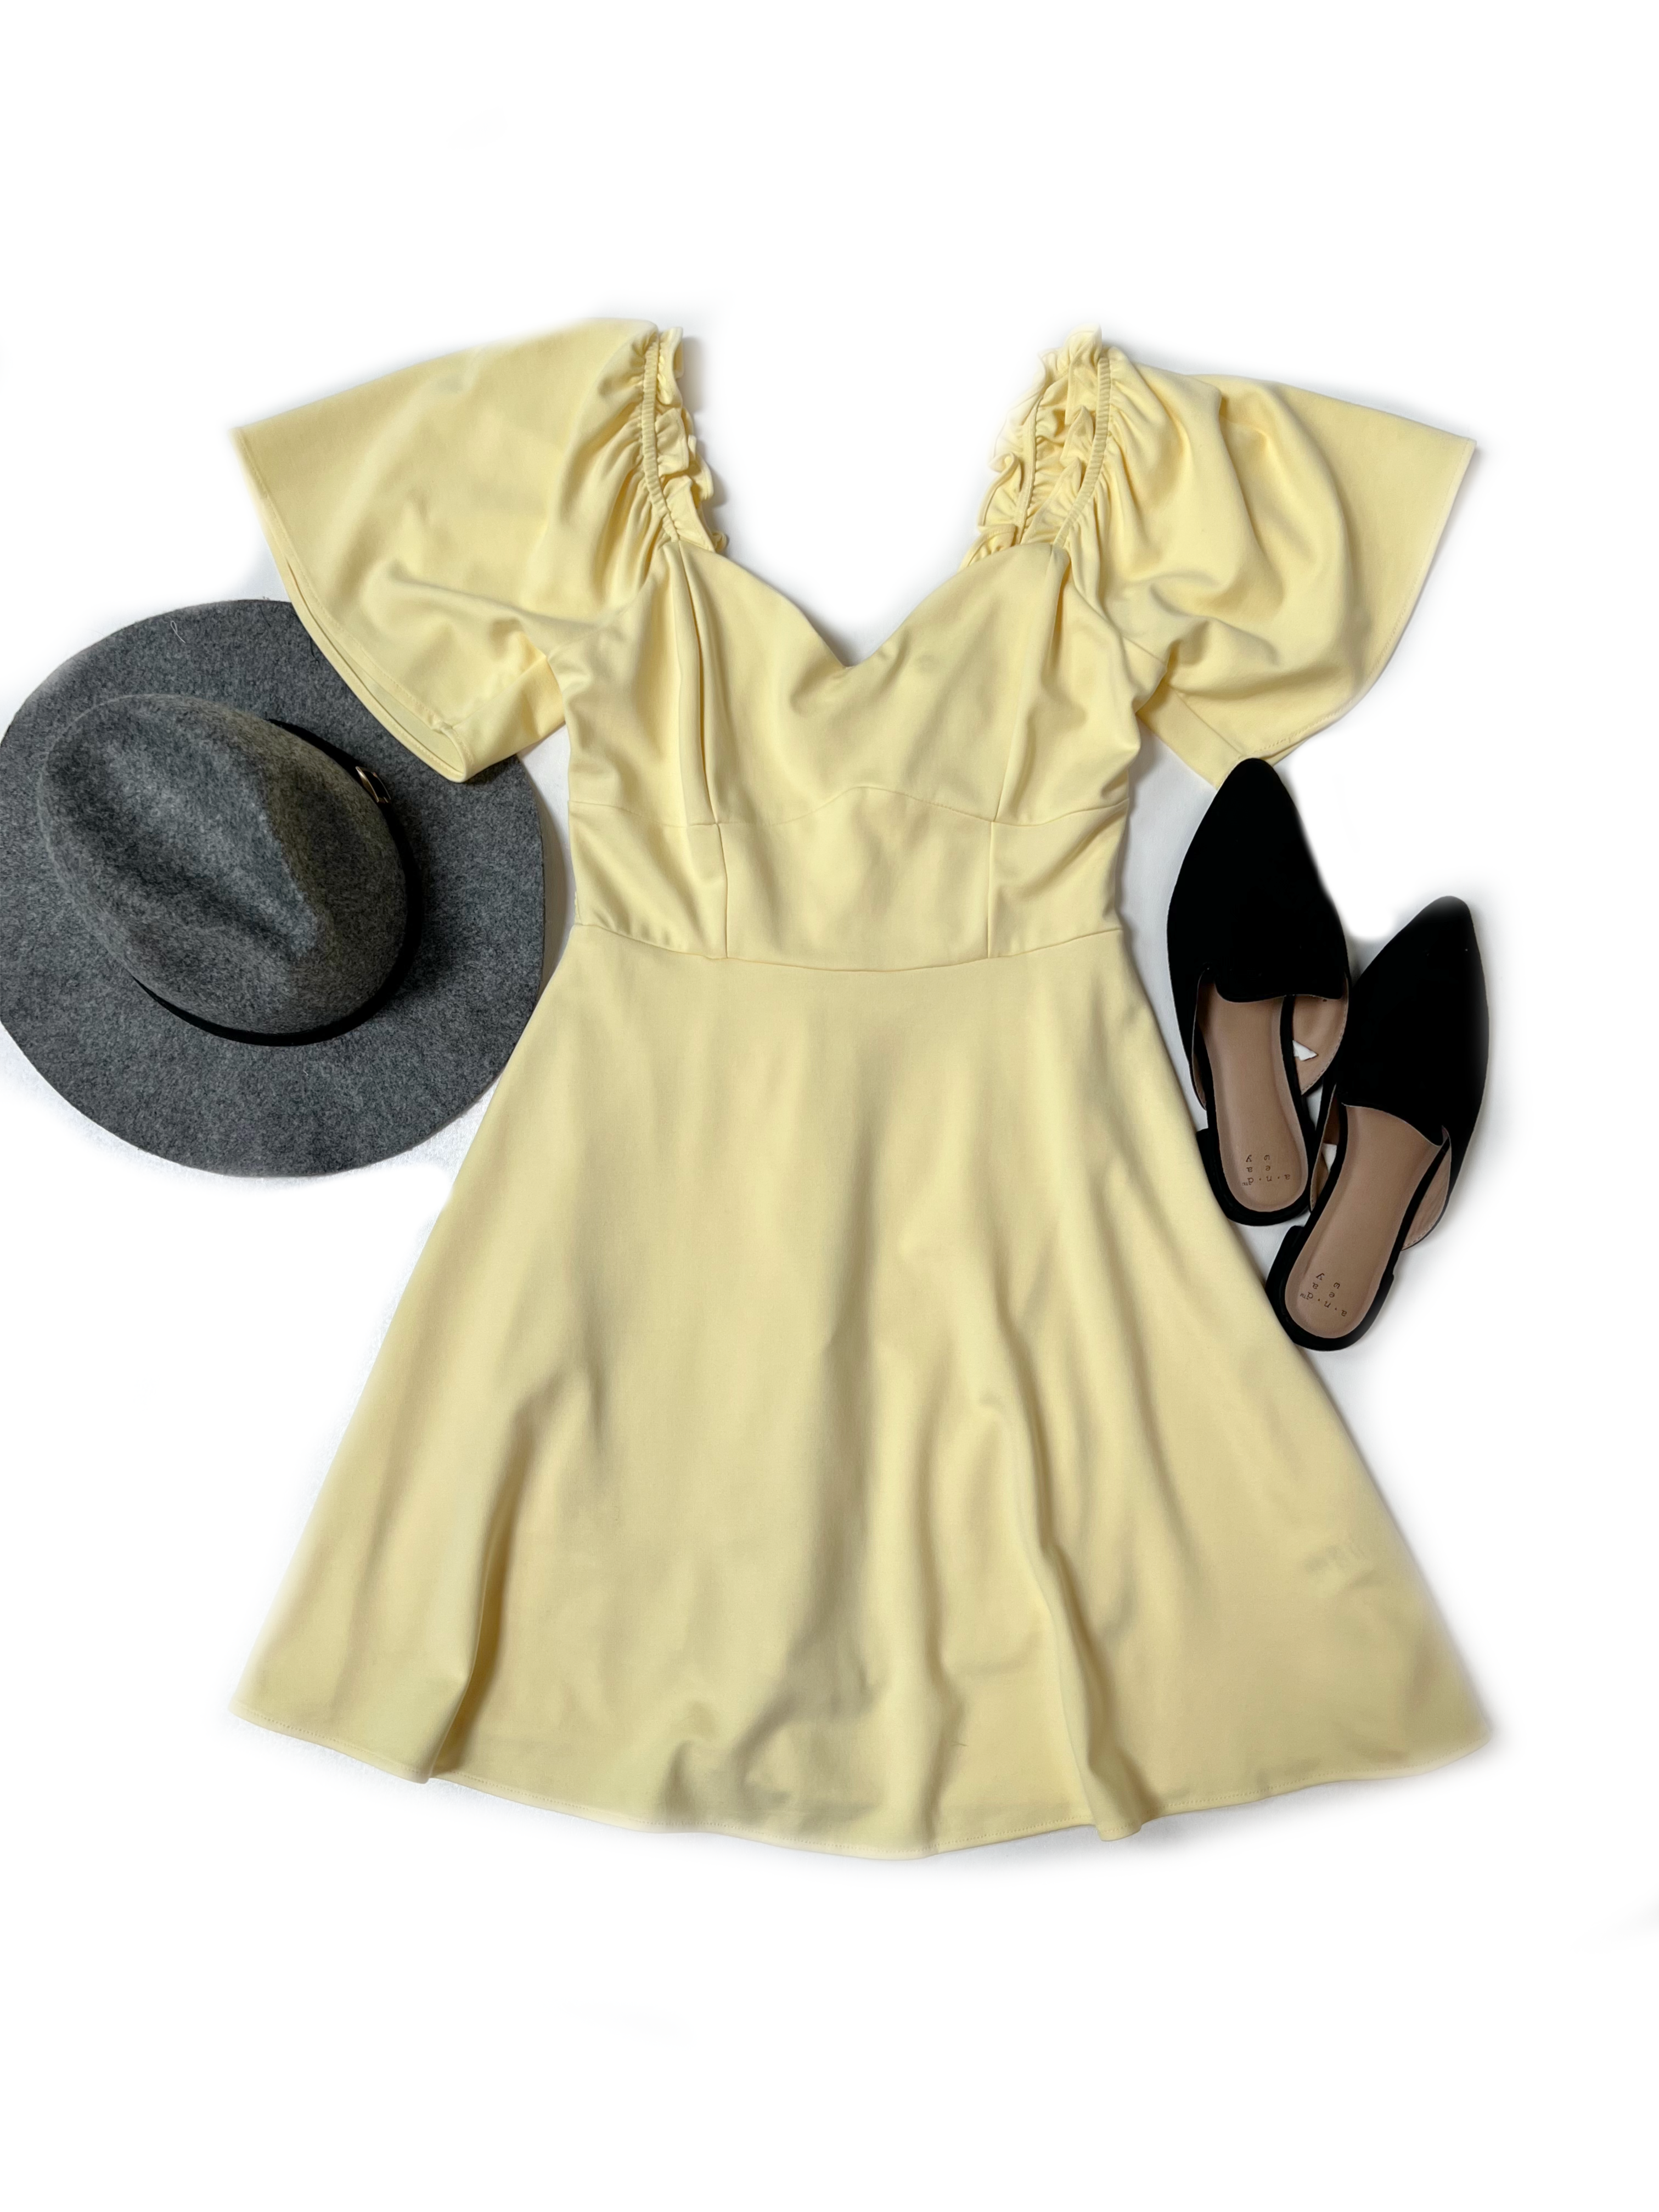 Songs of Spring - Romper Dress  Boutique Simplified   